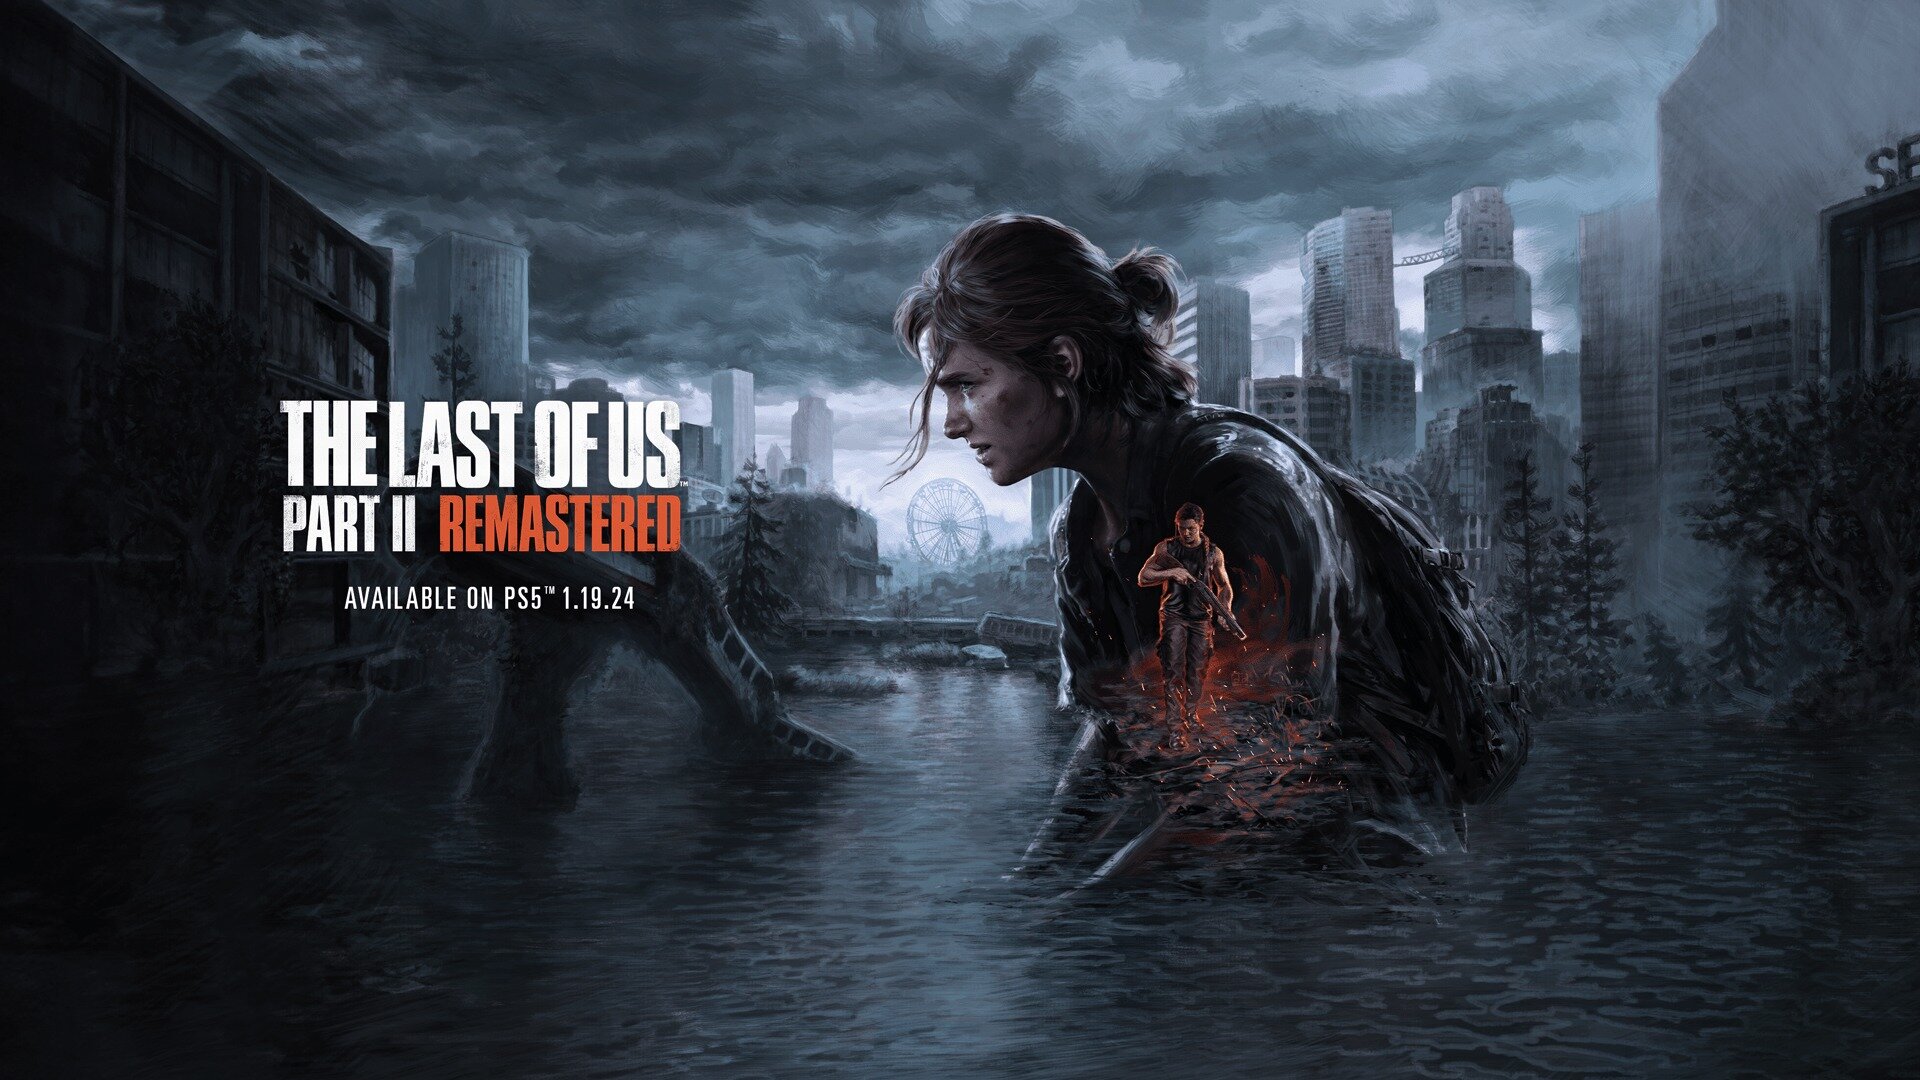 The Last of Us Part II Remastered comes in January on PS5 – Playstation